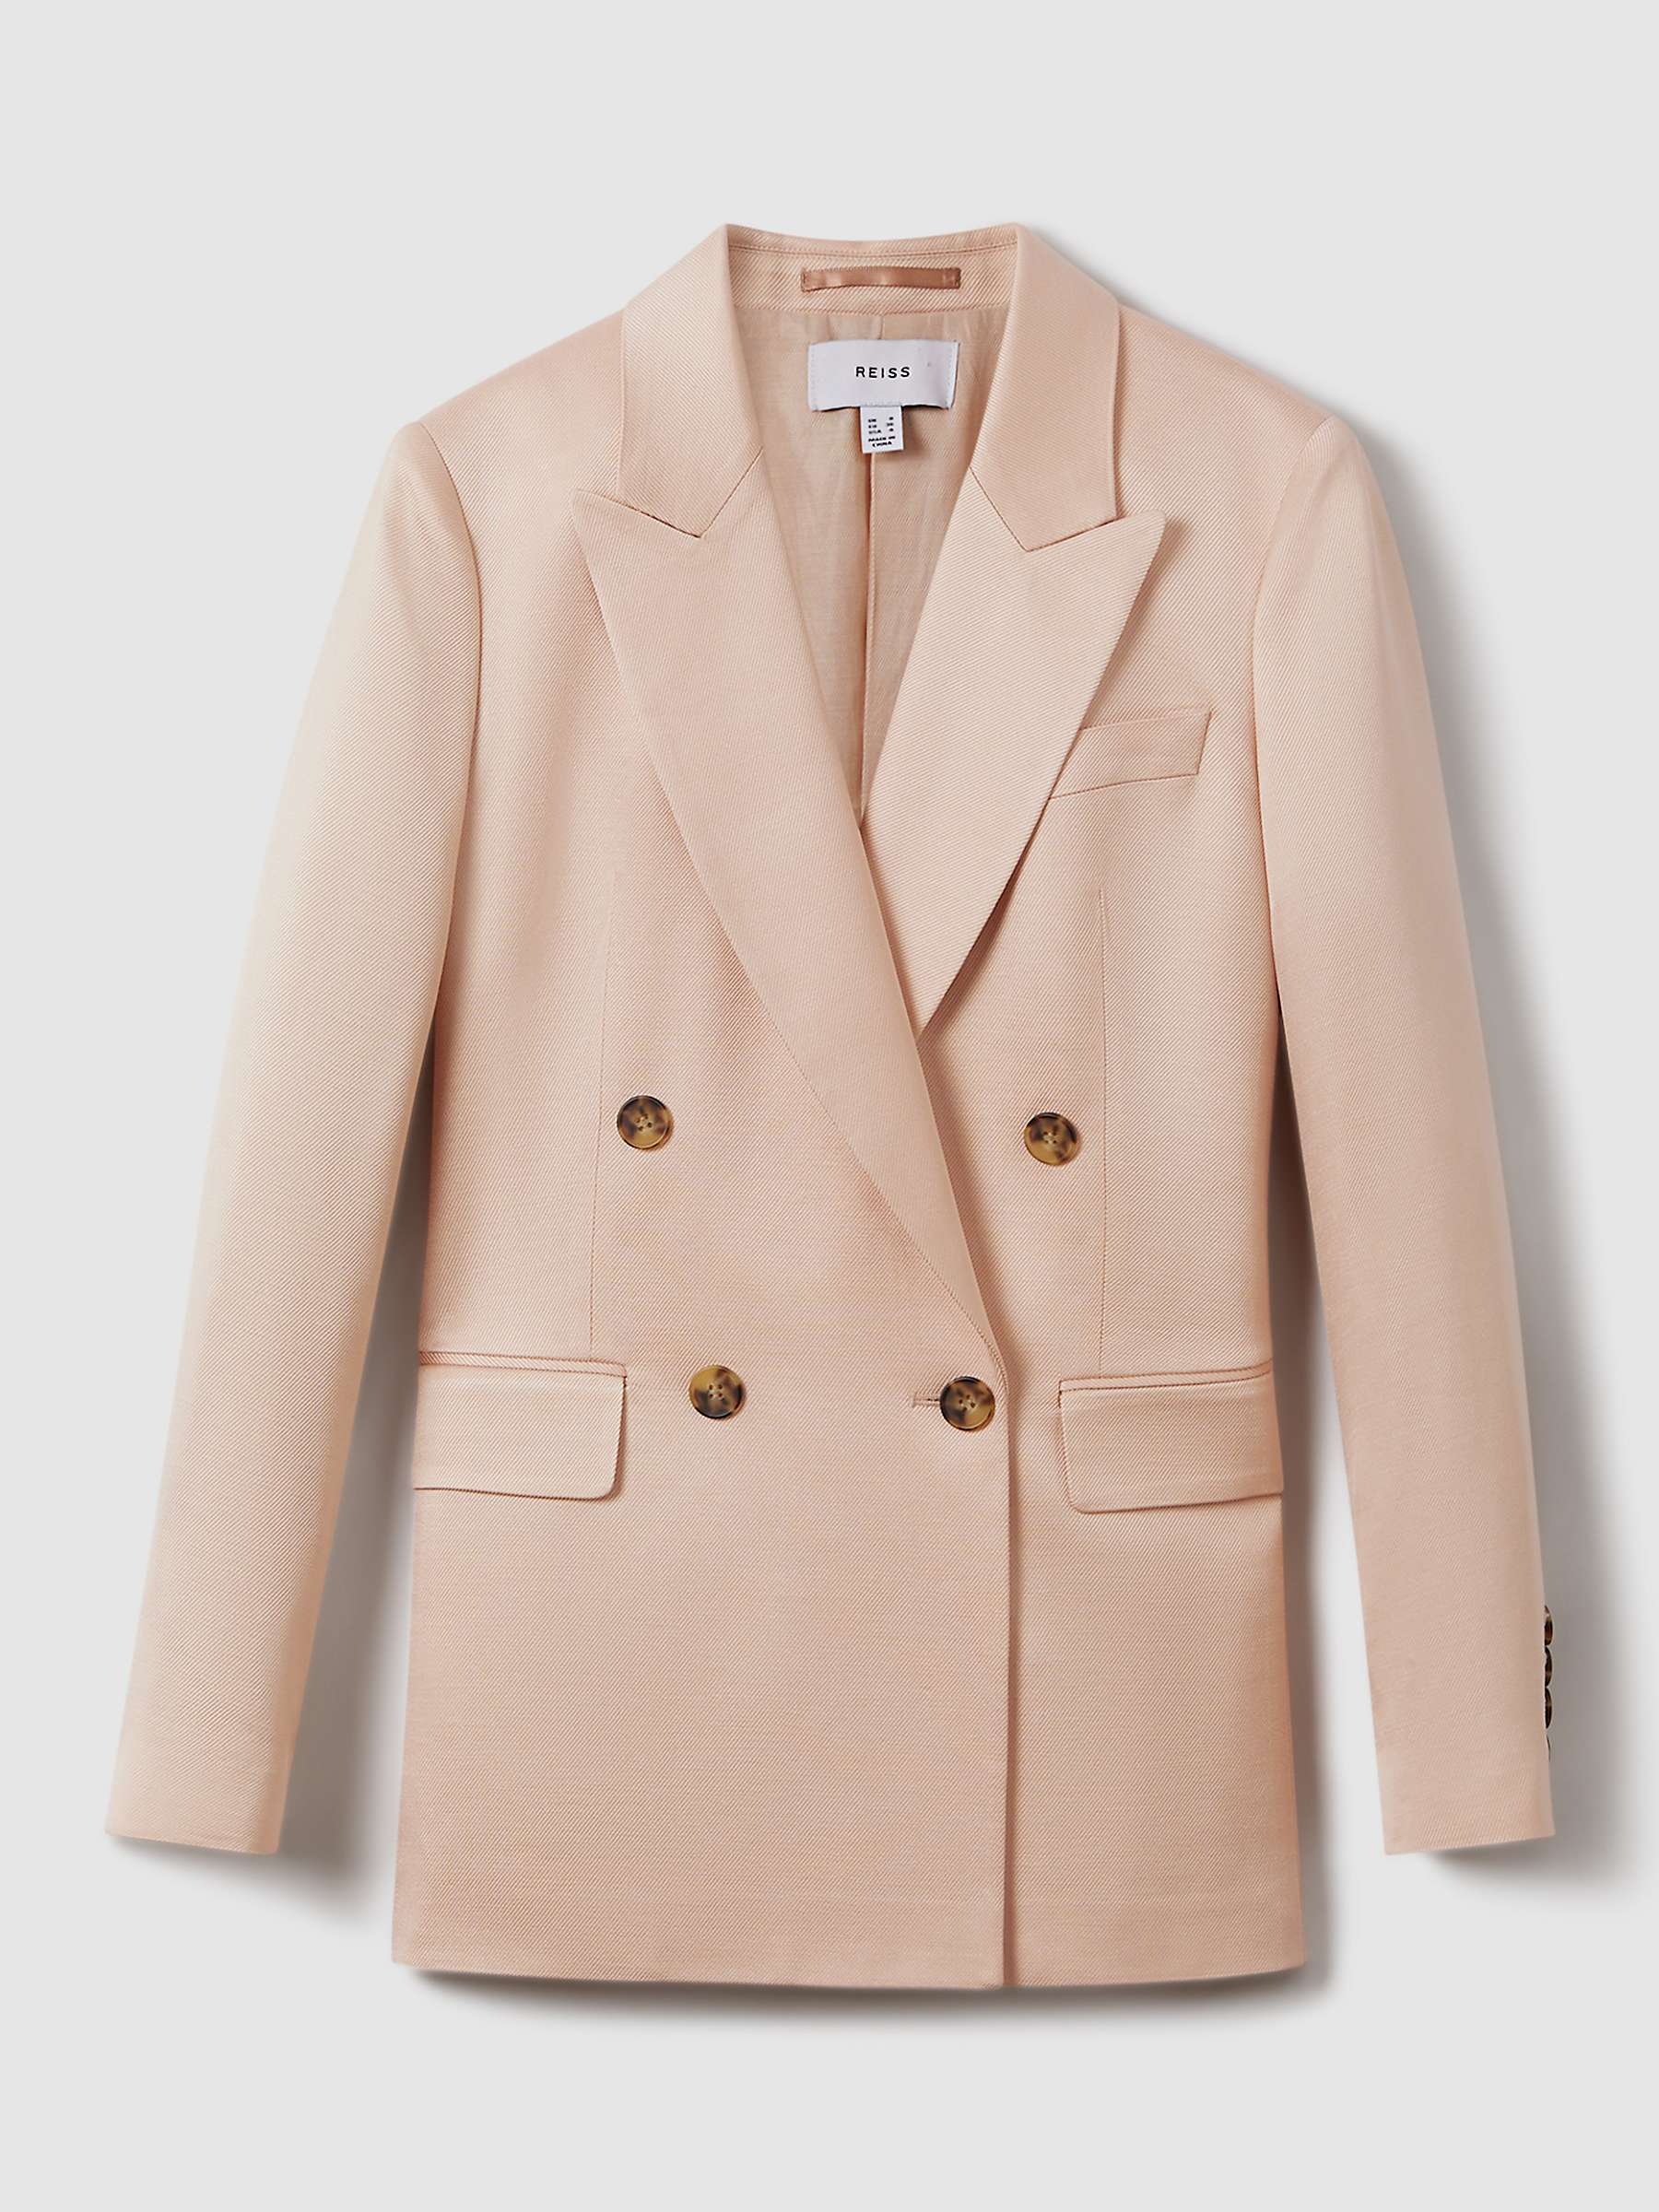 Buy Reiss Eve Double Breasted Blazer, Pink Online at johnlewis.com